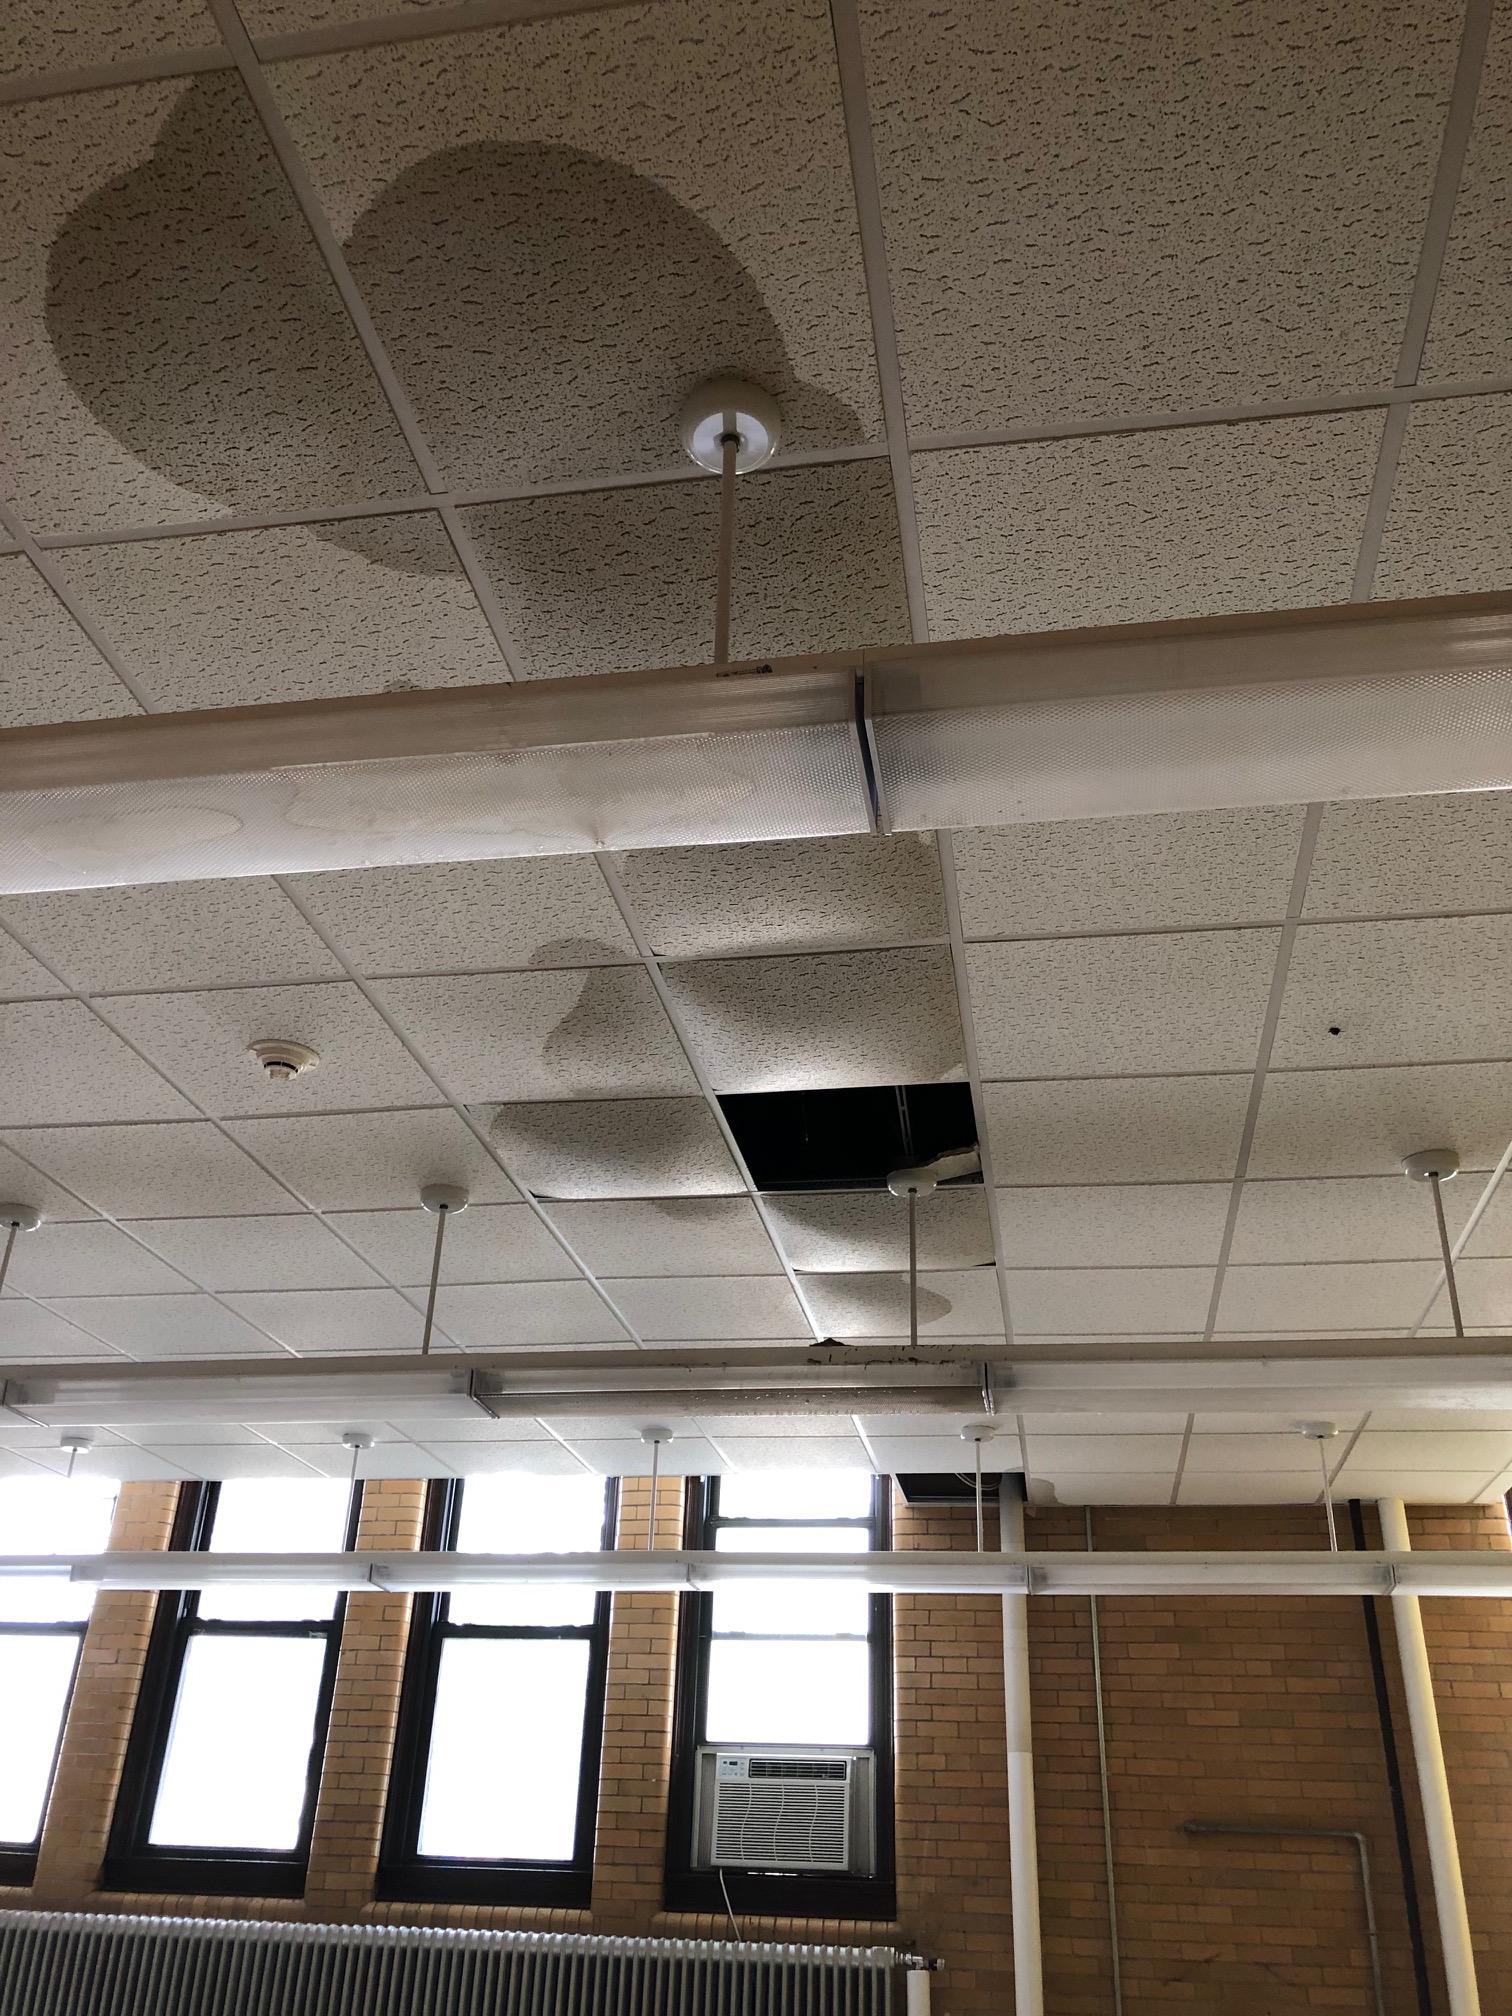 Water loss from the second floor creates a soaked ceiling on the first floor.